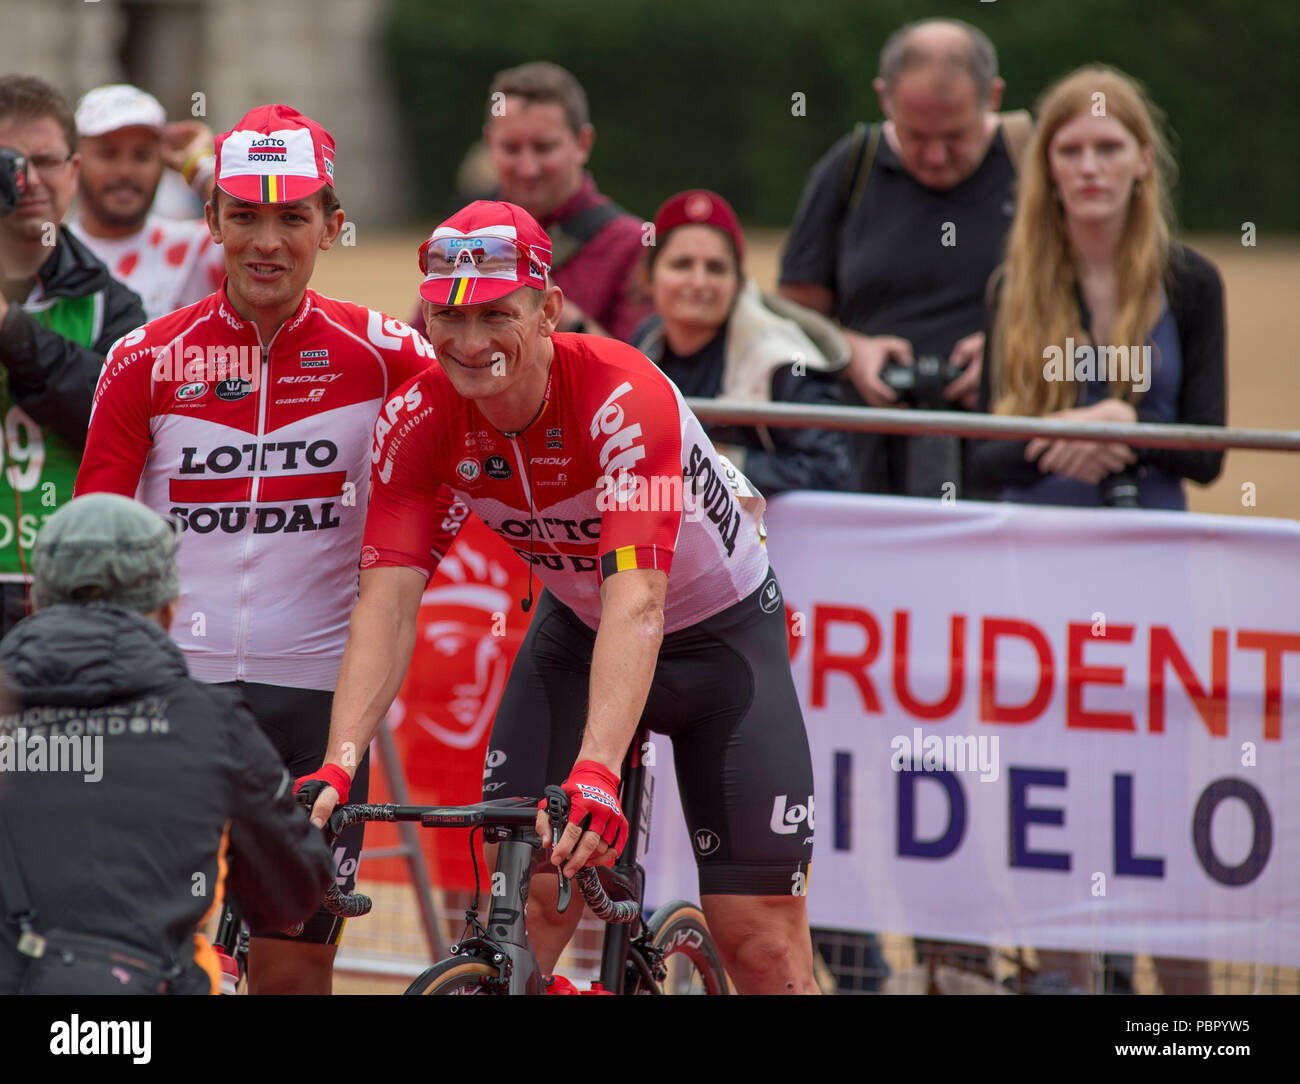 Horse Guards Parade, London, UK. 29 July, 2018. Britain’s only men’s UCI WorldTour race lines up for race start in central London with the riders and teams presented to spectators. Photo: Andre Greipel of team Lotto Soudal. Credit: Malcolm Park/Alamy Live News. Stock Photo